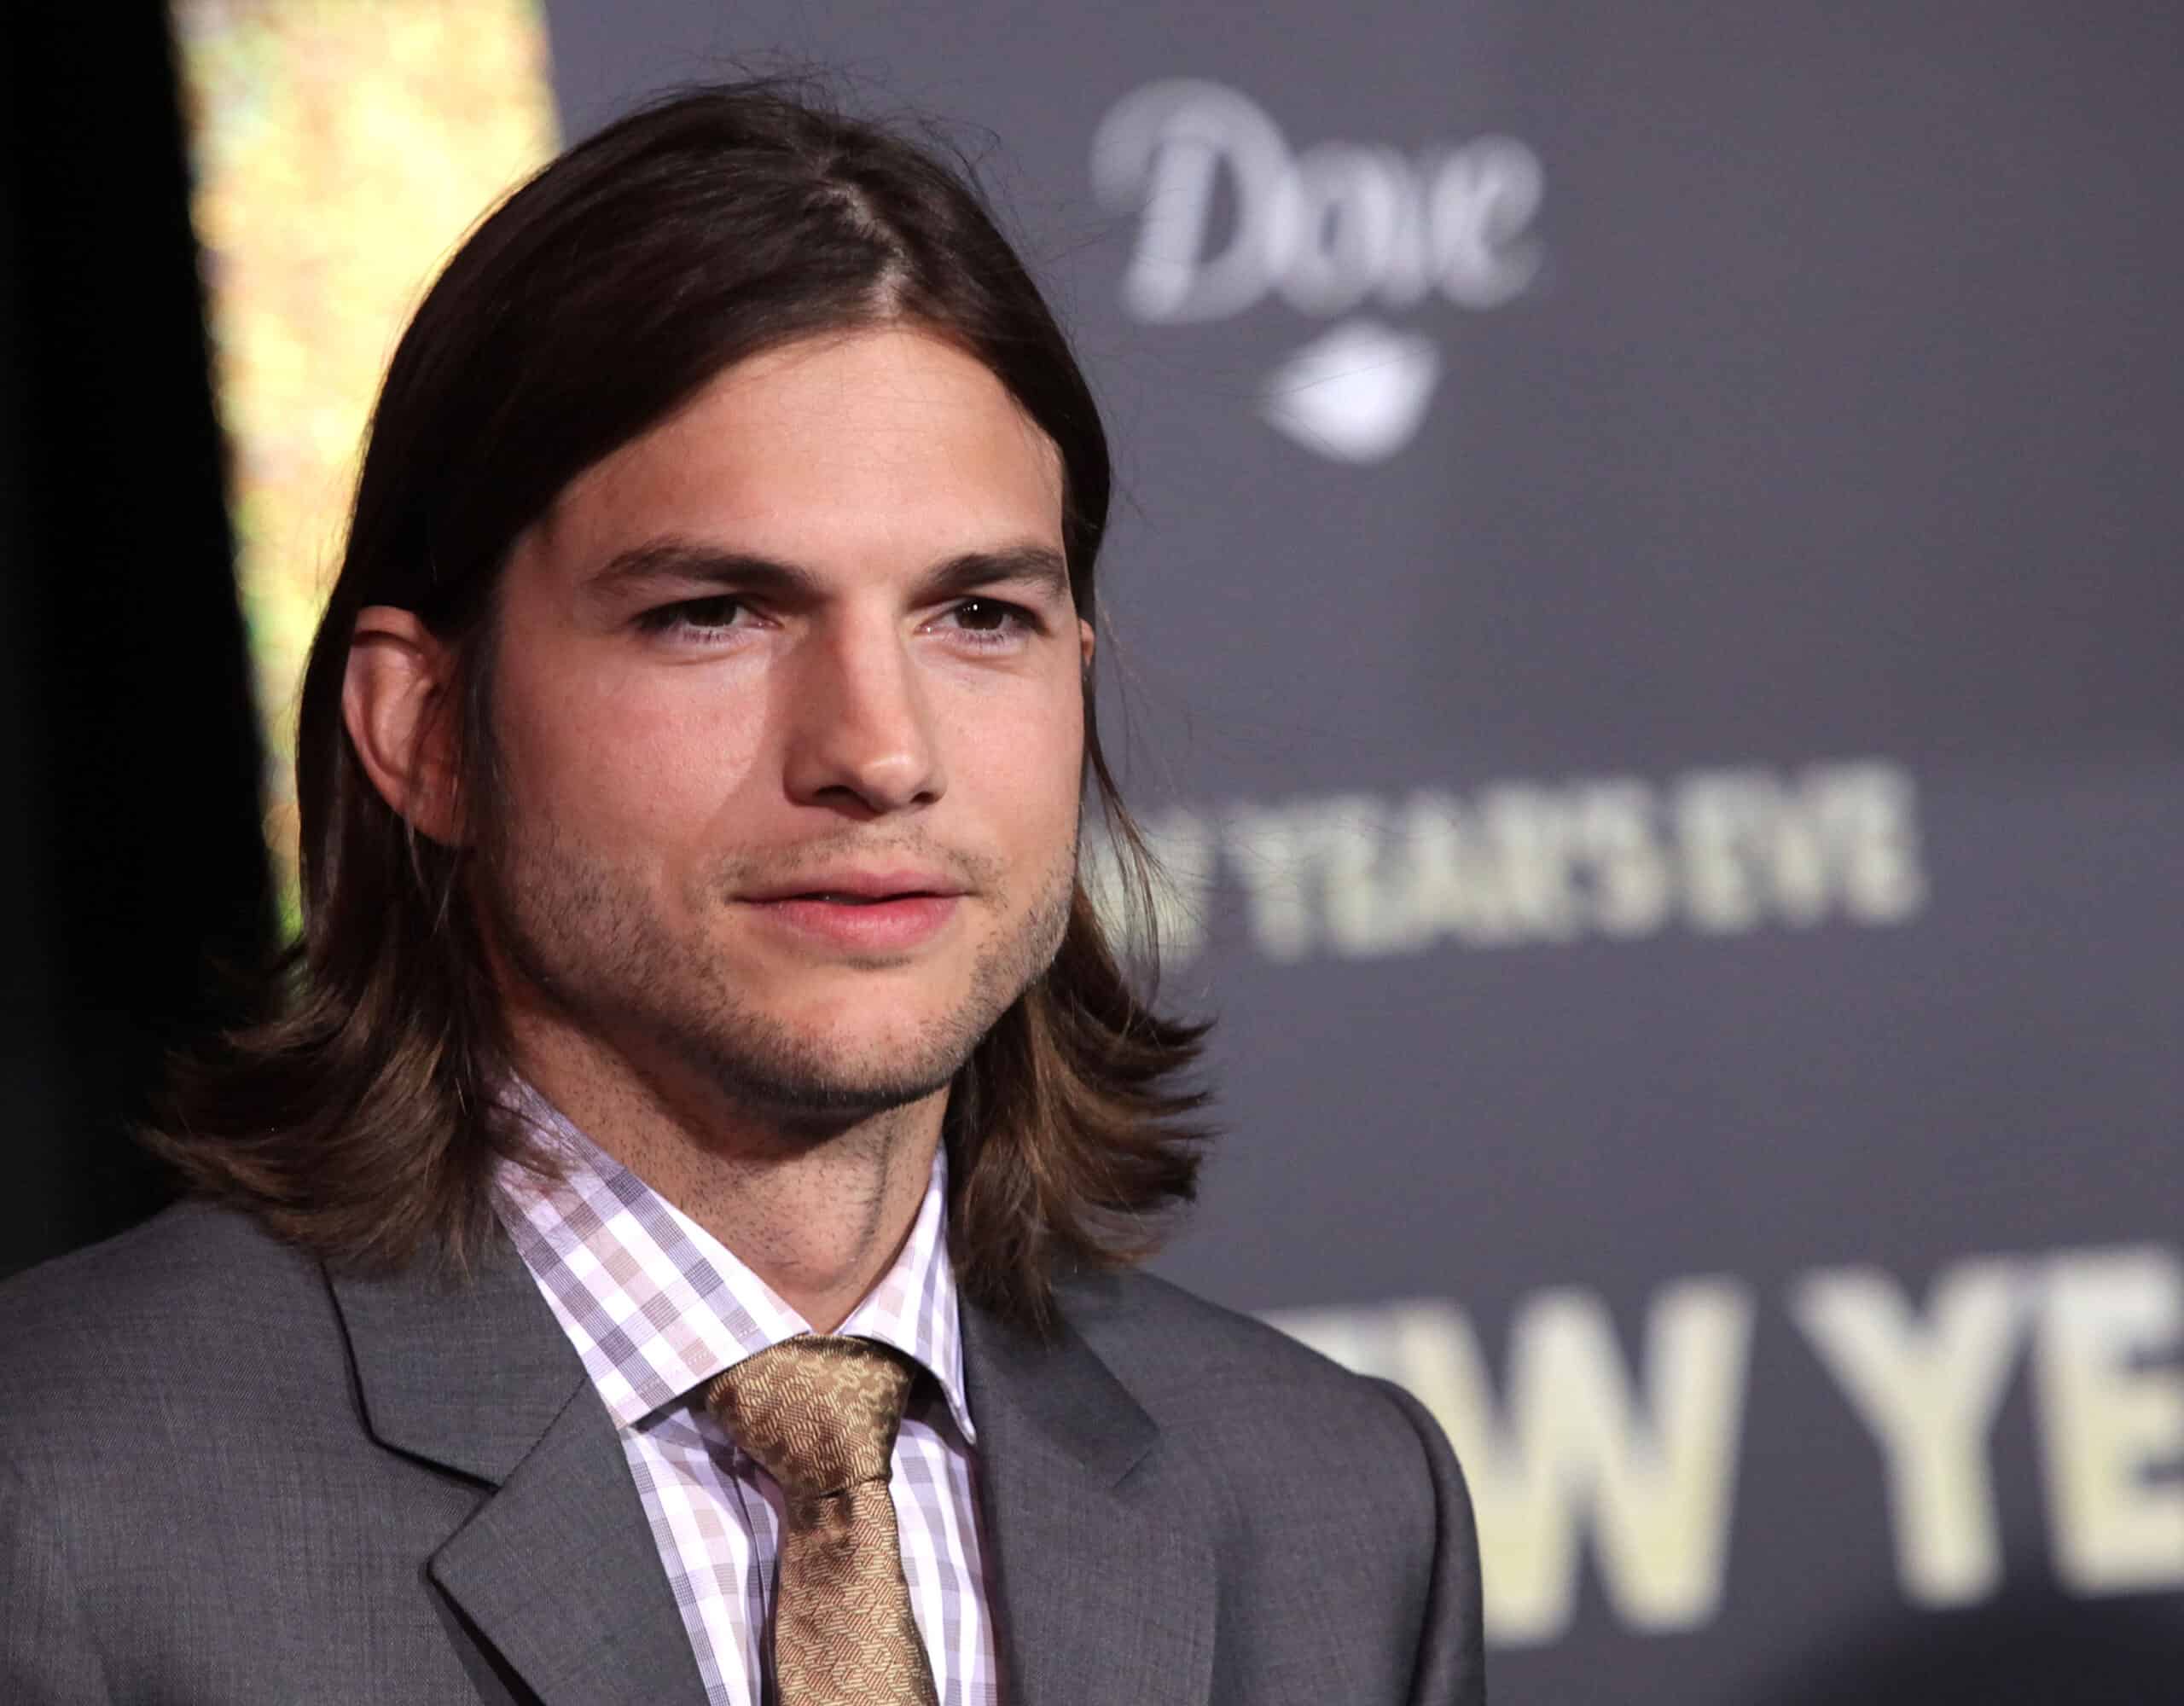 ashton-kutcher-net-worth-investments-and-businesses-history-computer